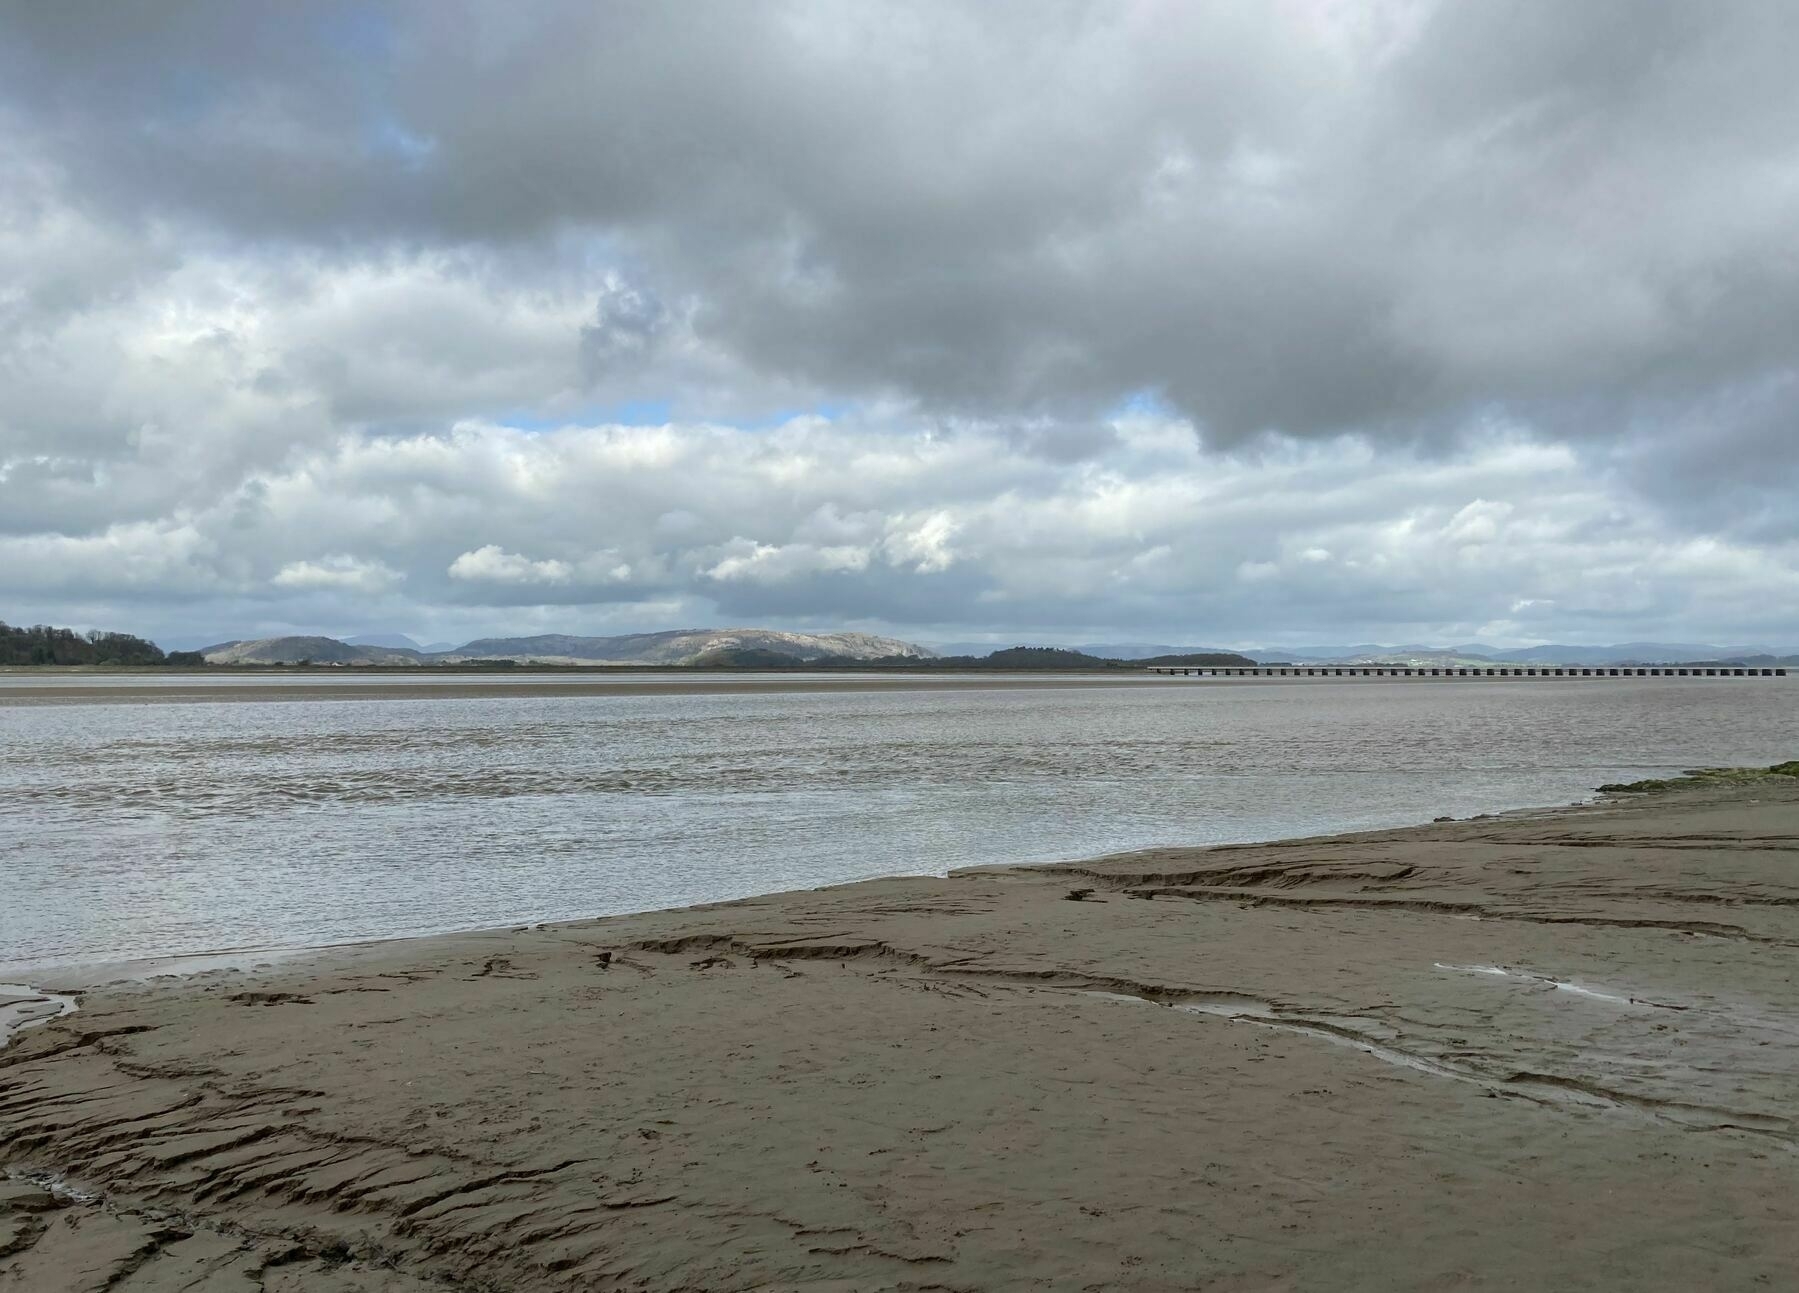 A view across the river Kent estuary at Arnside in the north west of the UK. The hills of the lake district can be seen on the far side and the railway viaduct crosses the river in the distance.